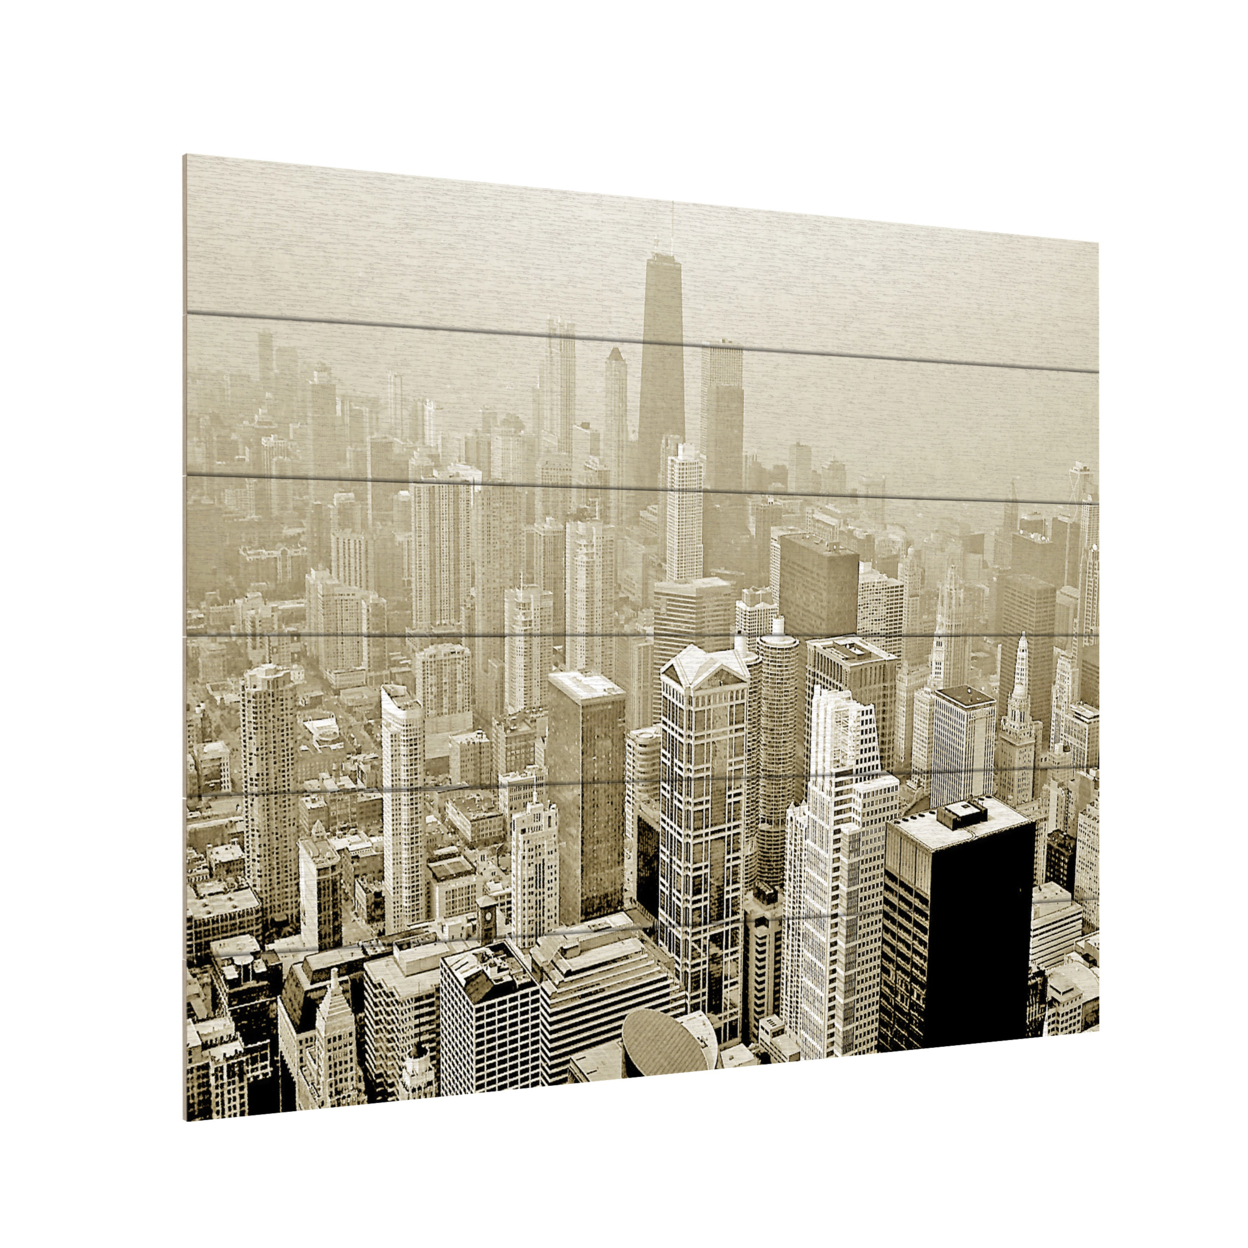 Wooden Slat Art 18 X 22 Inches Titled Chicago Skyline Ready To Hang Home Decor Picture